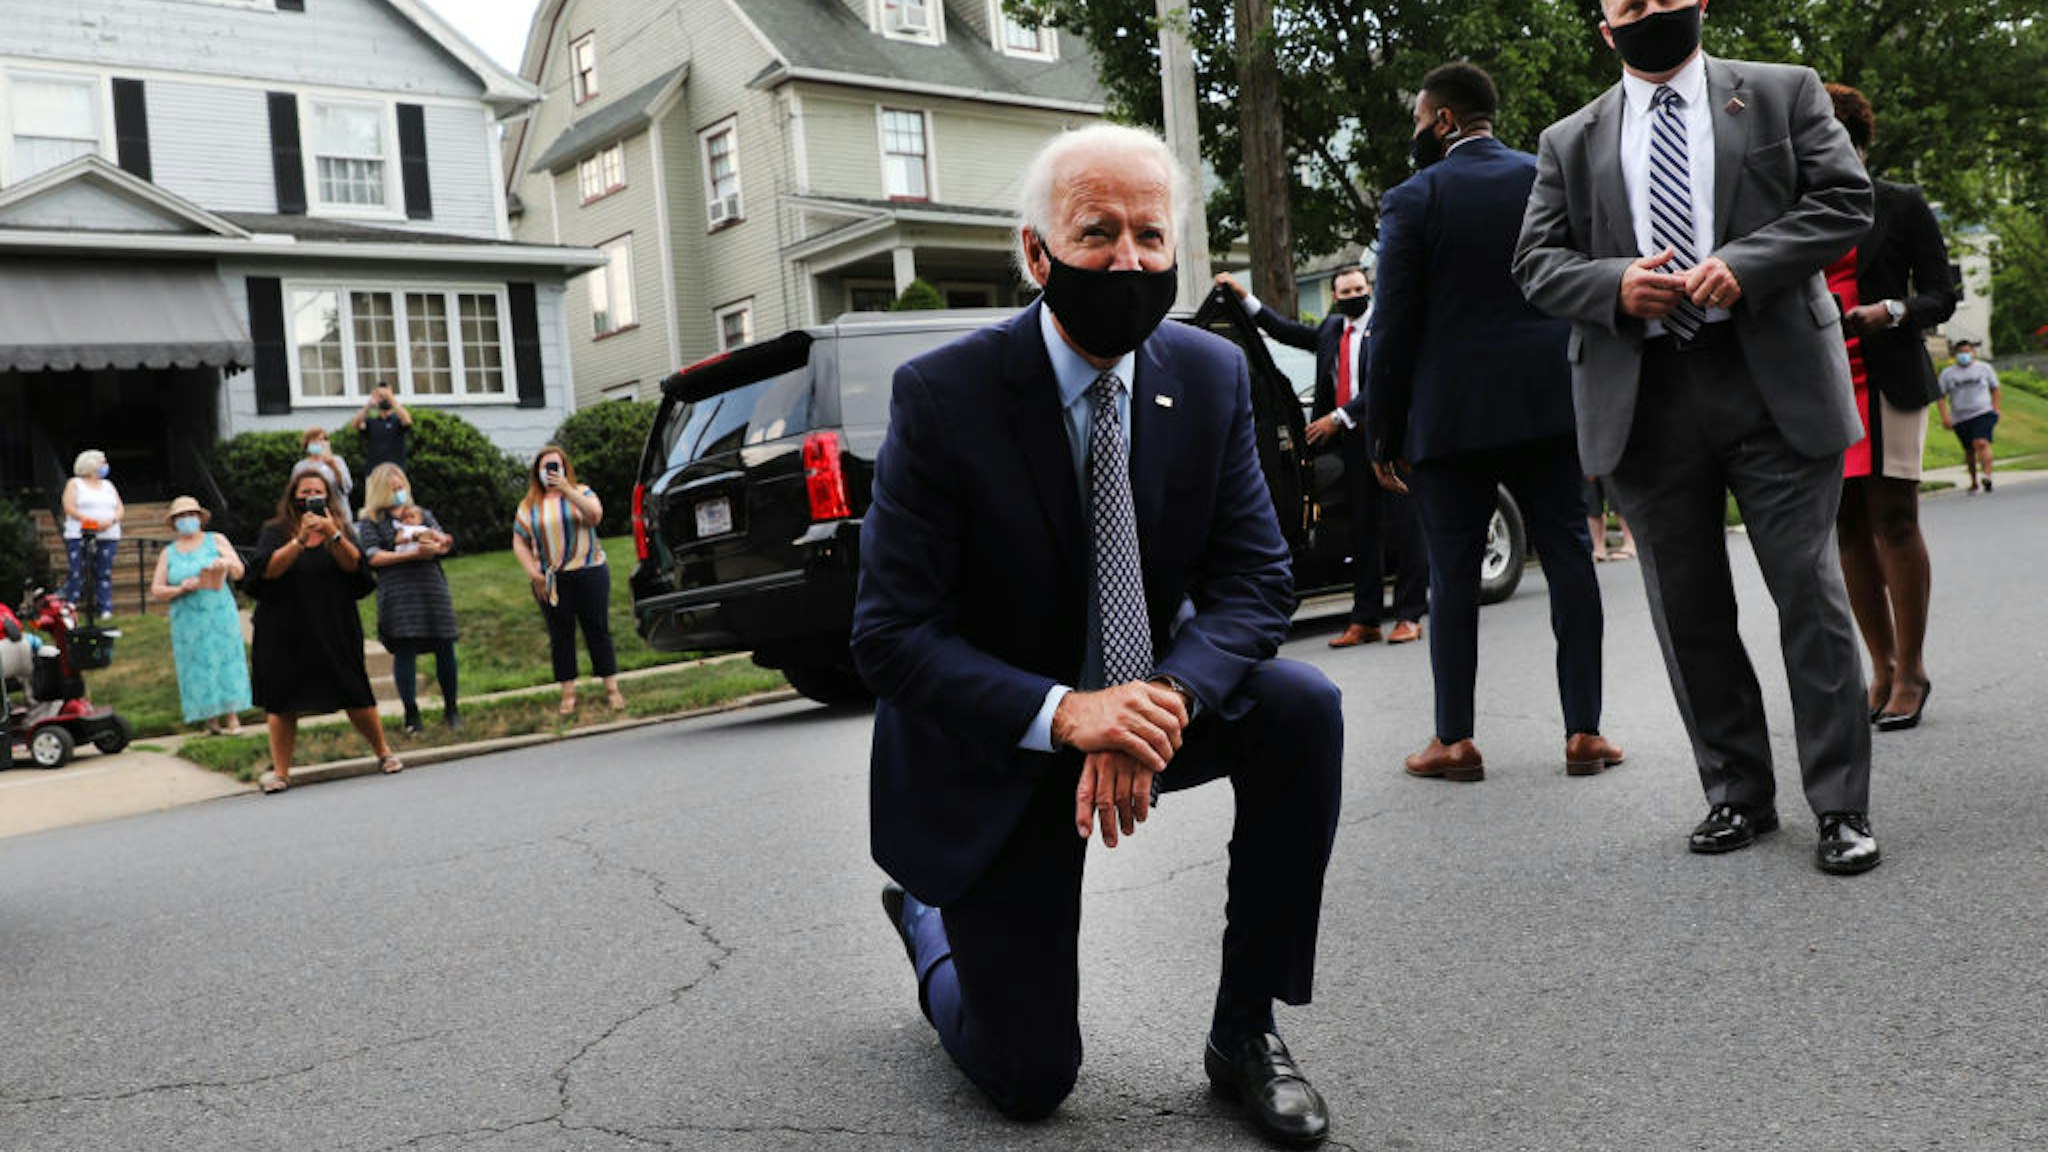 DUNMORE, PENNSYLVANIA - JULY 09: The presumptive Democratic presidential nominee Joe Biden stops in front of his childhood home on July 09, 2020 in Scranton, Pennsylvania. The former vice president toured a metal works plant in Dunmore in northeastern Pennsylvania and spoke about his economic recovery plan. With fewer than four months until the election, polls continue to show Biden leading in Pennsylvania, widely regarded as a battleground state in the race for the presidency. (Photo by